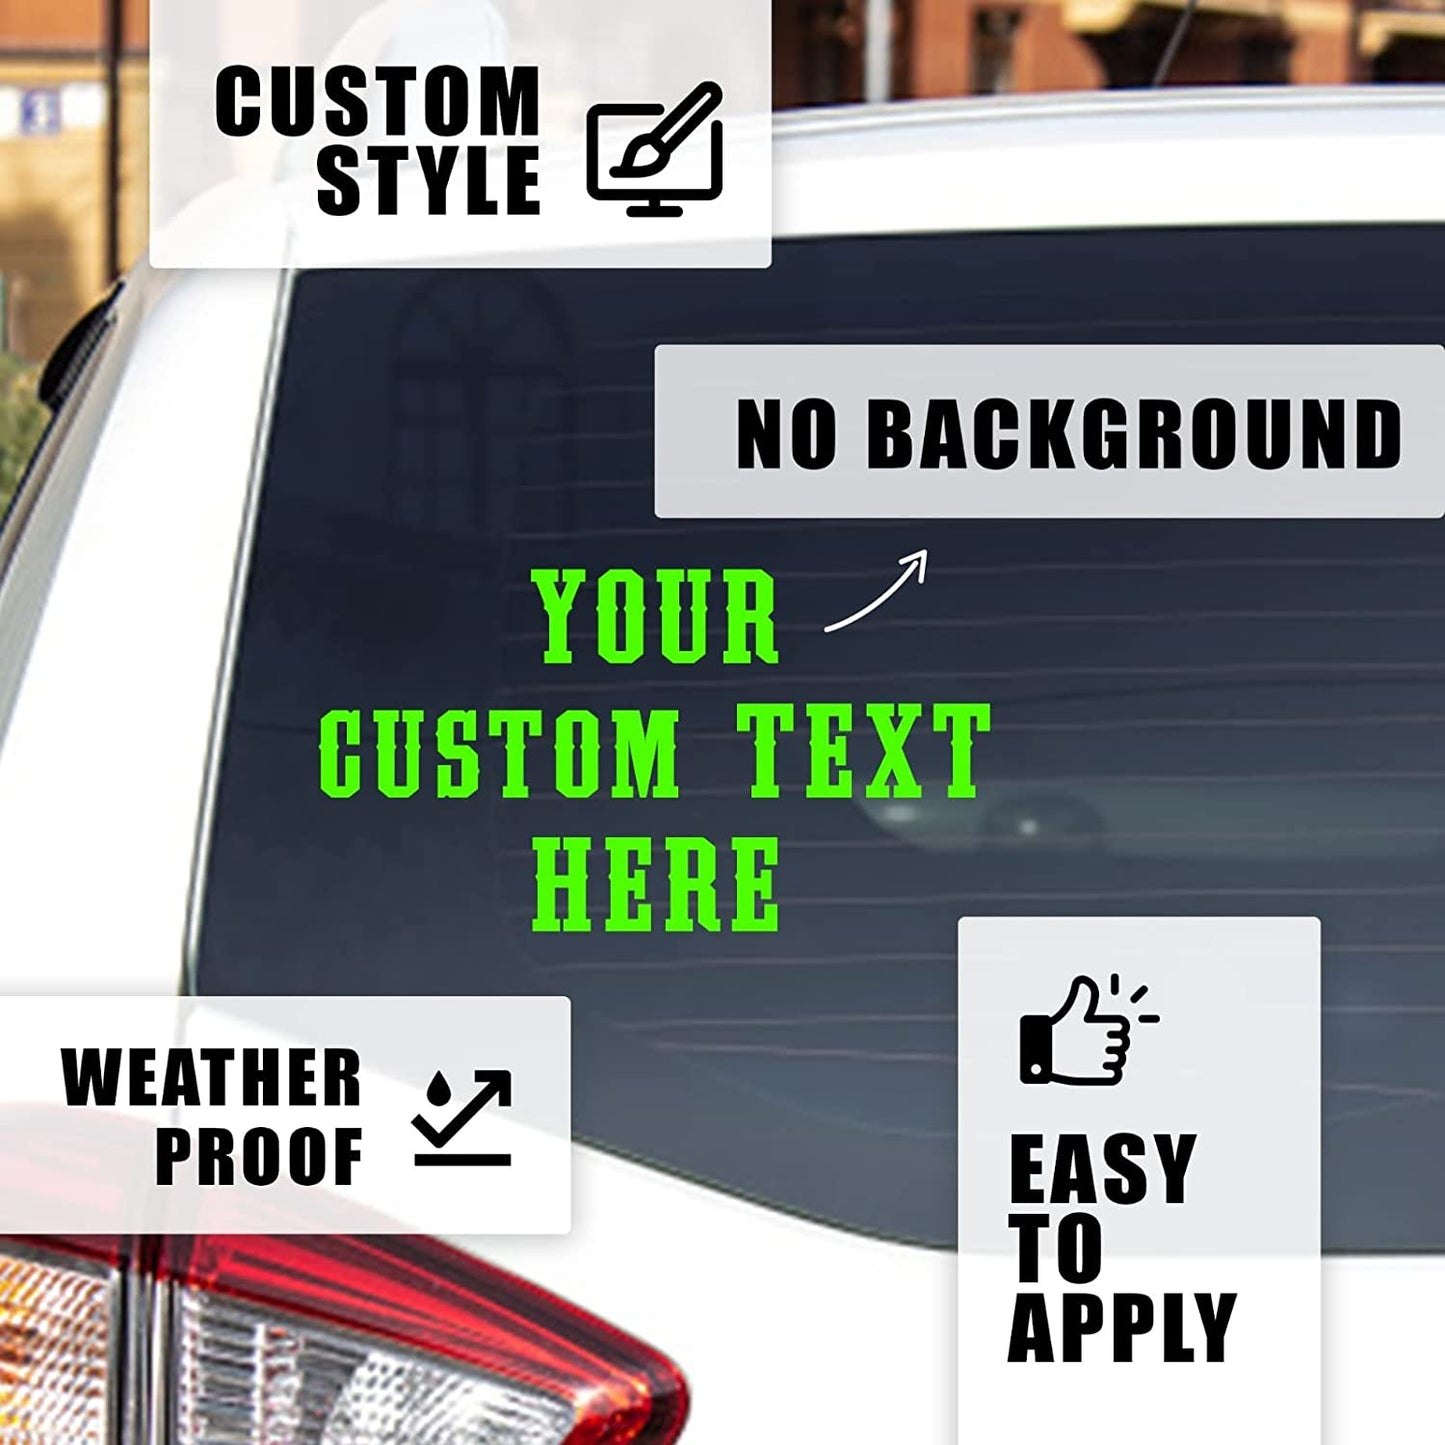 Custom Vinyl Lettering Decal | Make Your Own Car Sticker Decal Personalized Text - Waterproof and Easy to Apply on Semi, Truck, Car, Boat, Window, Windshield, Door, Business or Bumper | 30 Fonts & 11 Colors (9 inch High Lettering)